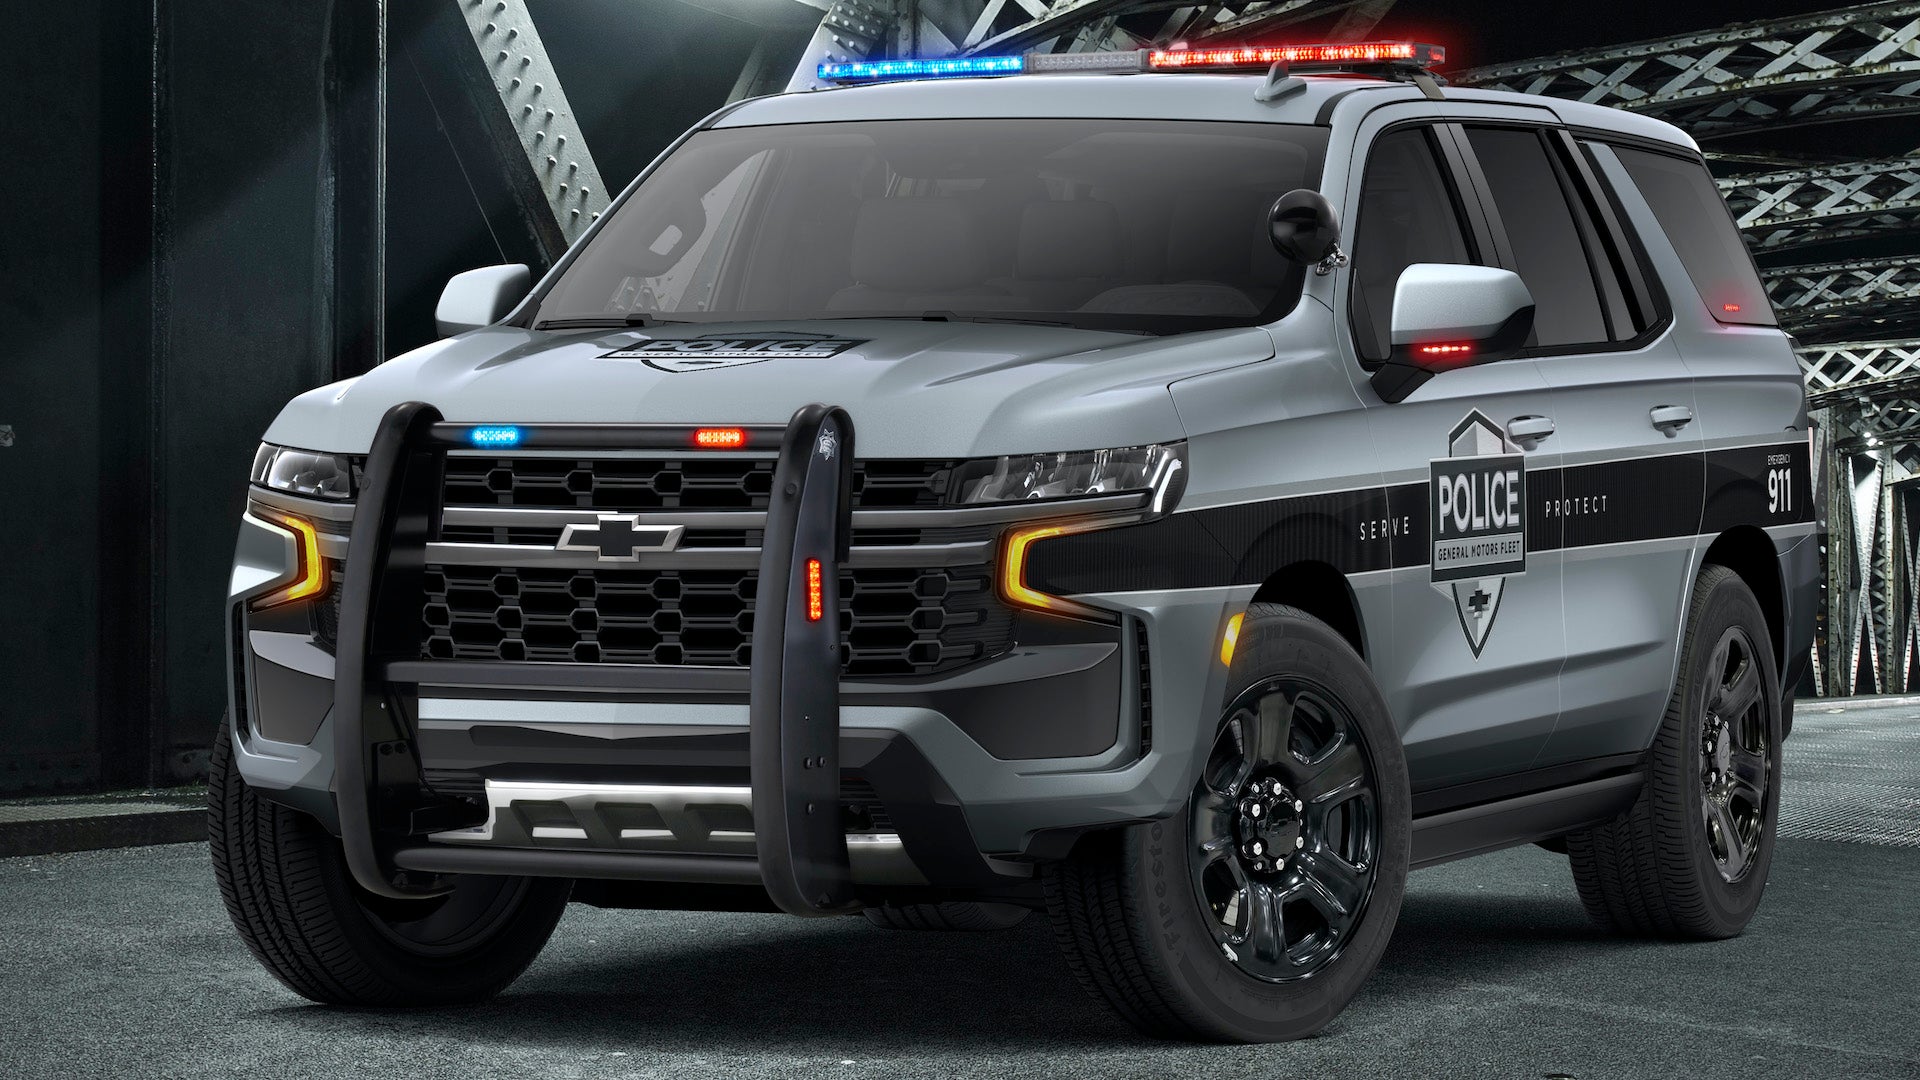 The 2021 Chevrolet Tahoe Pursuit-Rated Police Car Is Downright Menacing